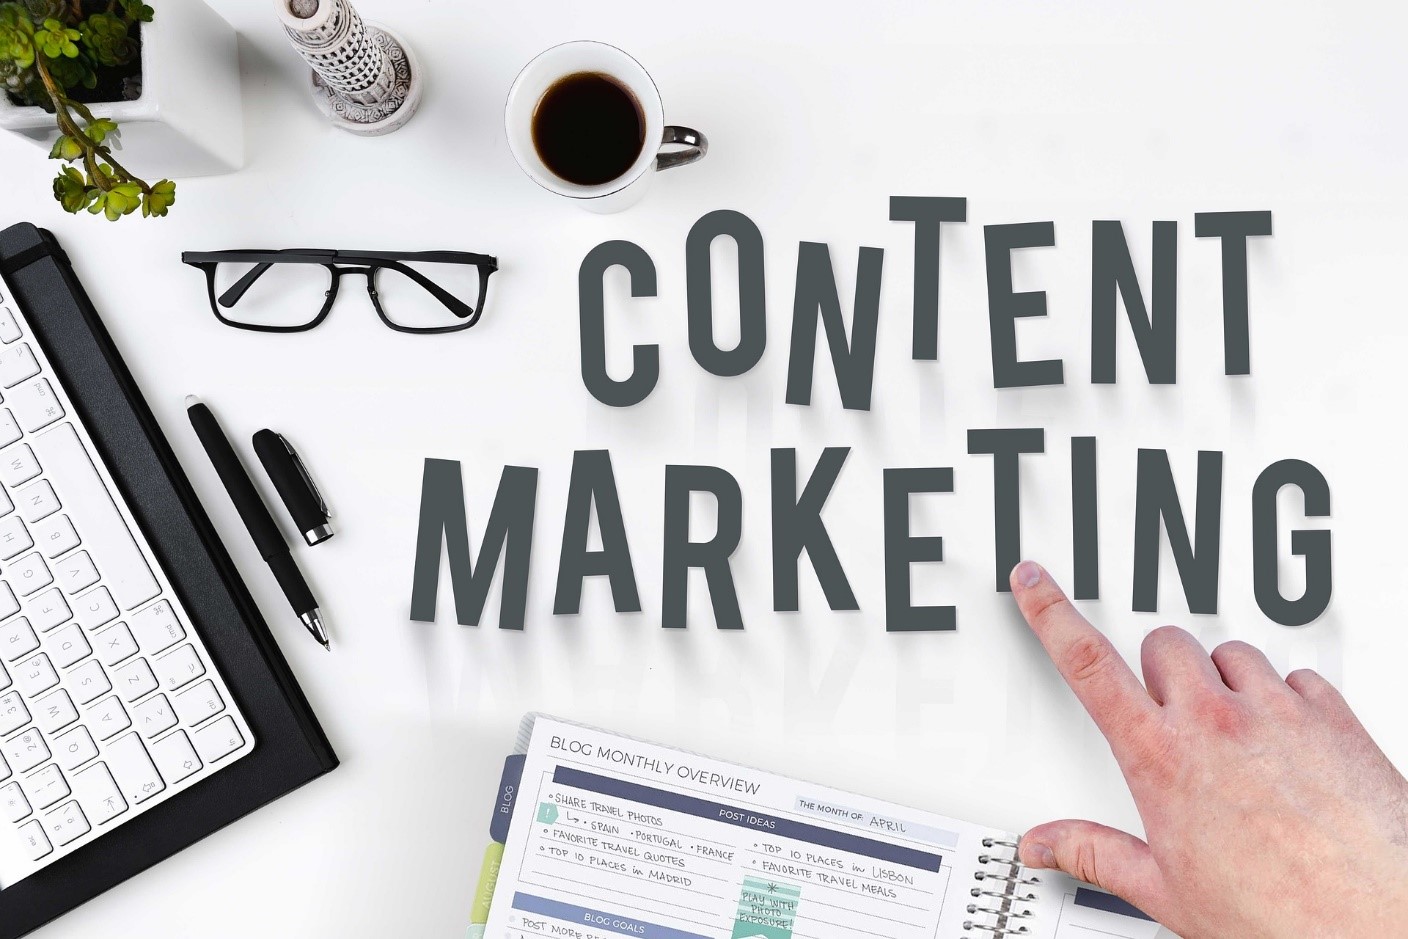 7 Effective Ways Of Content Marketing To Boost Your Traffic In 2019